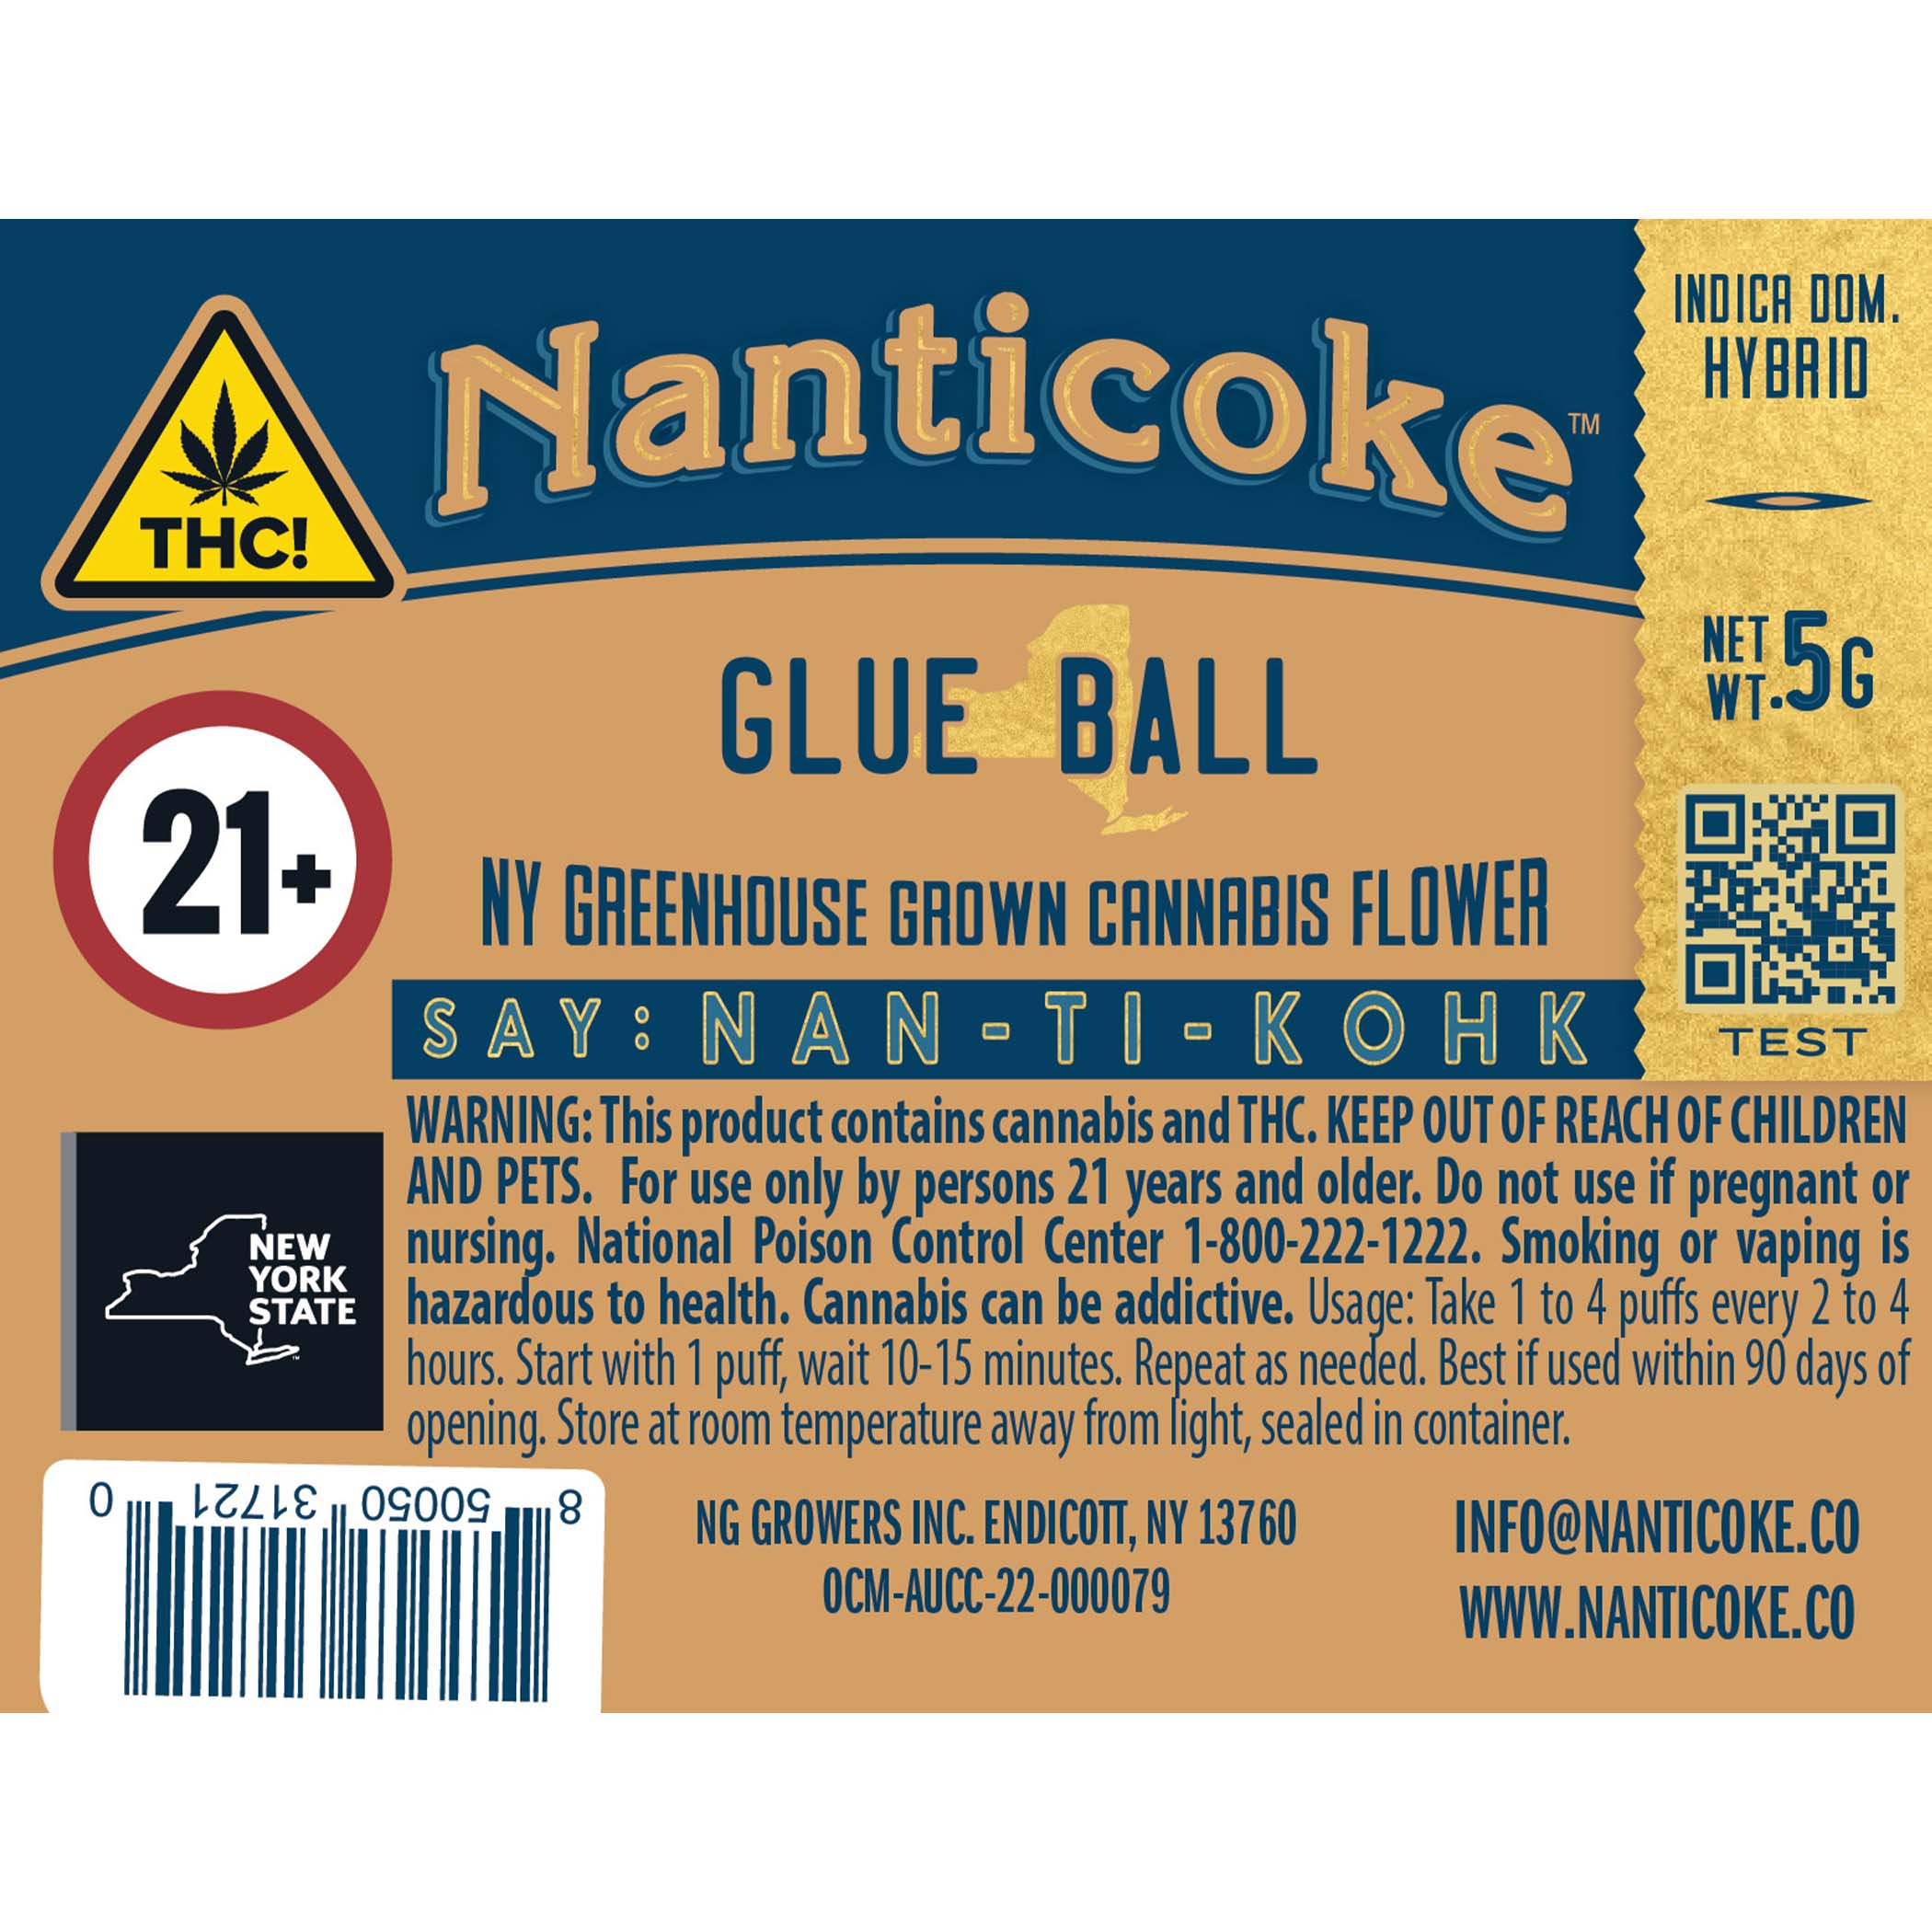 Glueball Pre-Roll Joints label